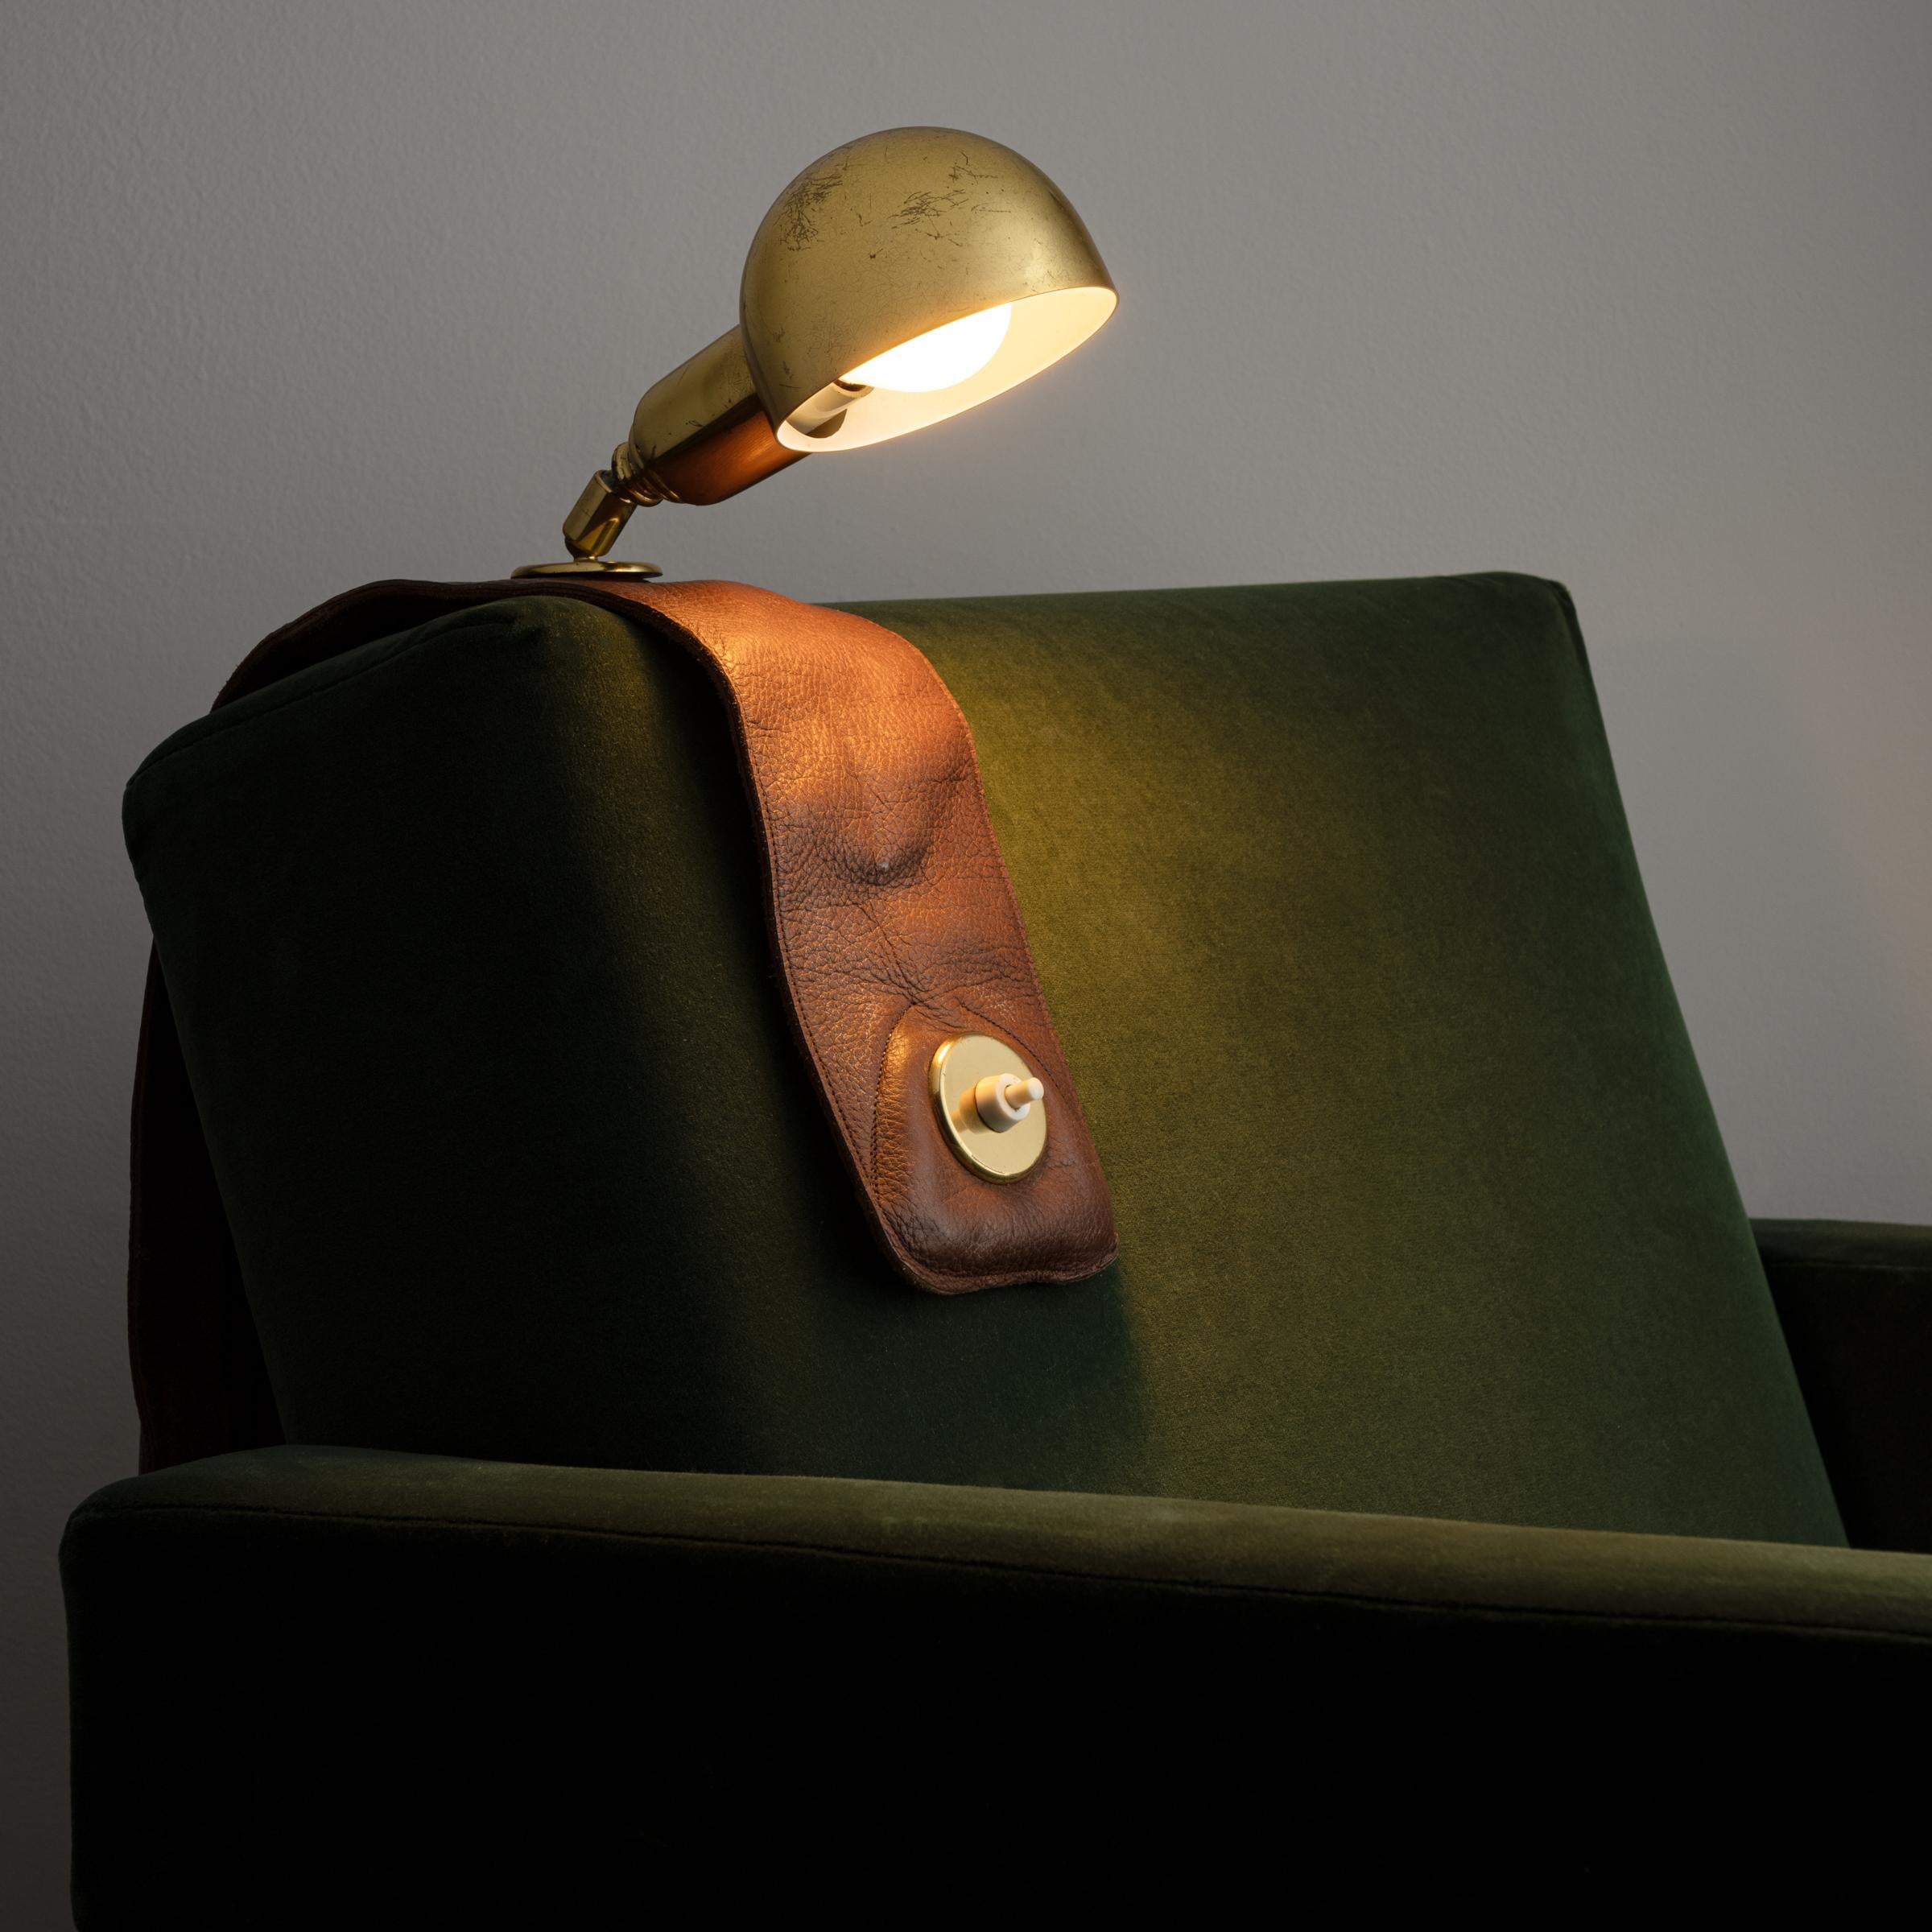 Model Lp01 armchair lamp by Luigi Caccia Dominioni for Azucena. Designed and manufactured in Italy, circa 1970s. Leather and brass. Brass shade adjust to various positions. We recommend one E27 40w maximum bulb. Bulbs not included.